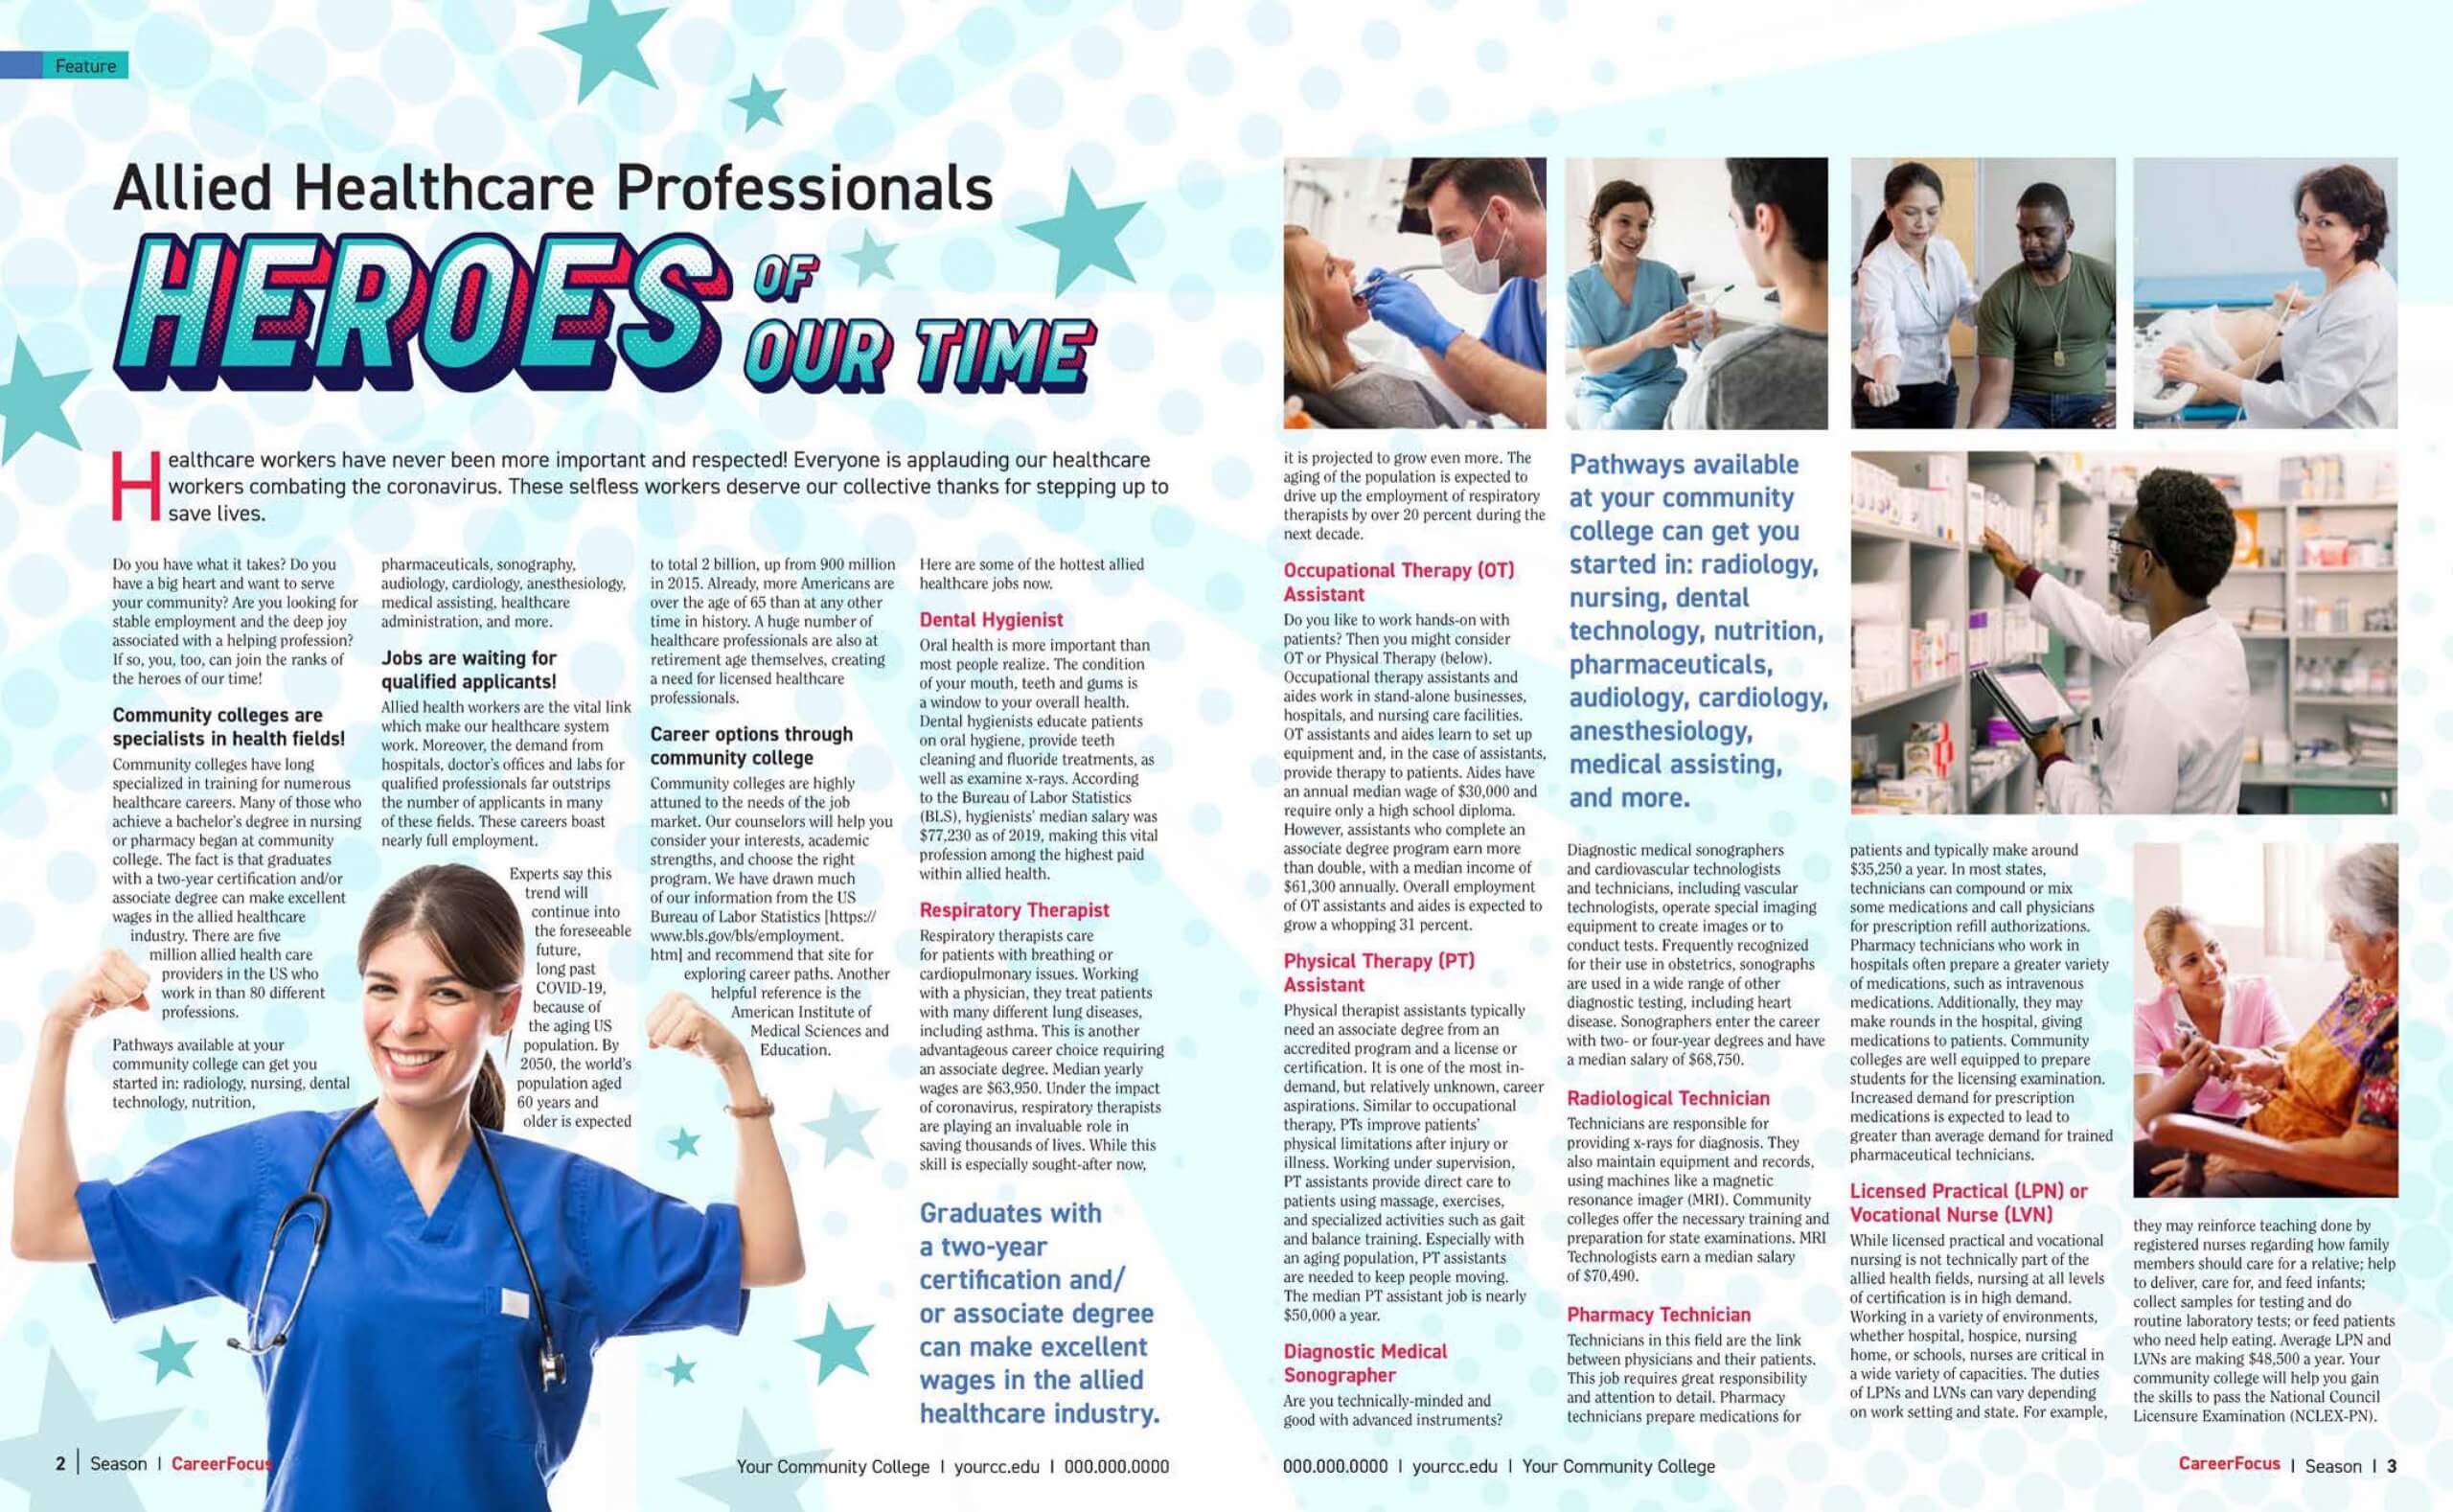 article spread in a magazine with title "Allied Healthcare Professionals Heroes of Our Time"